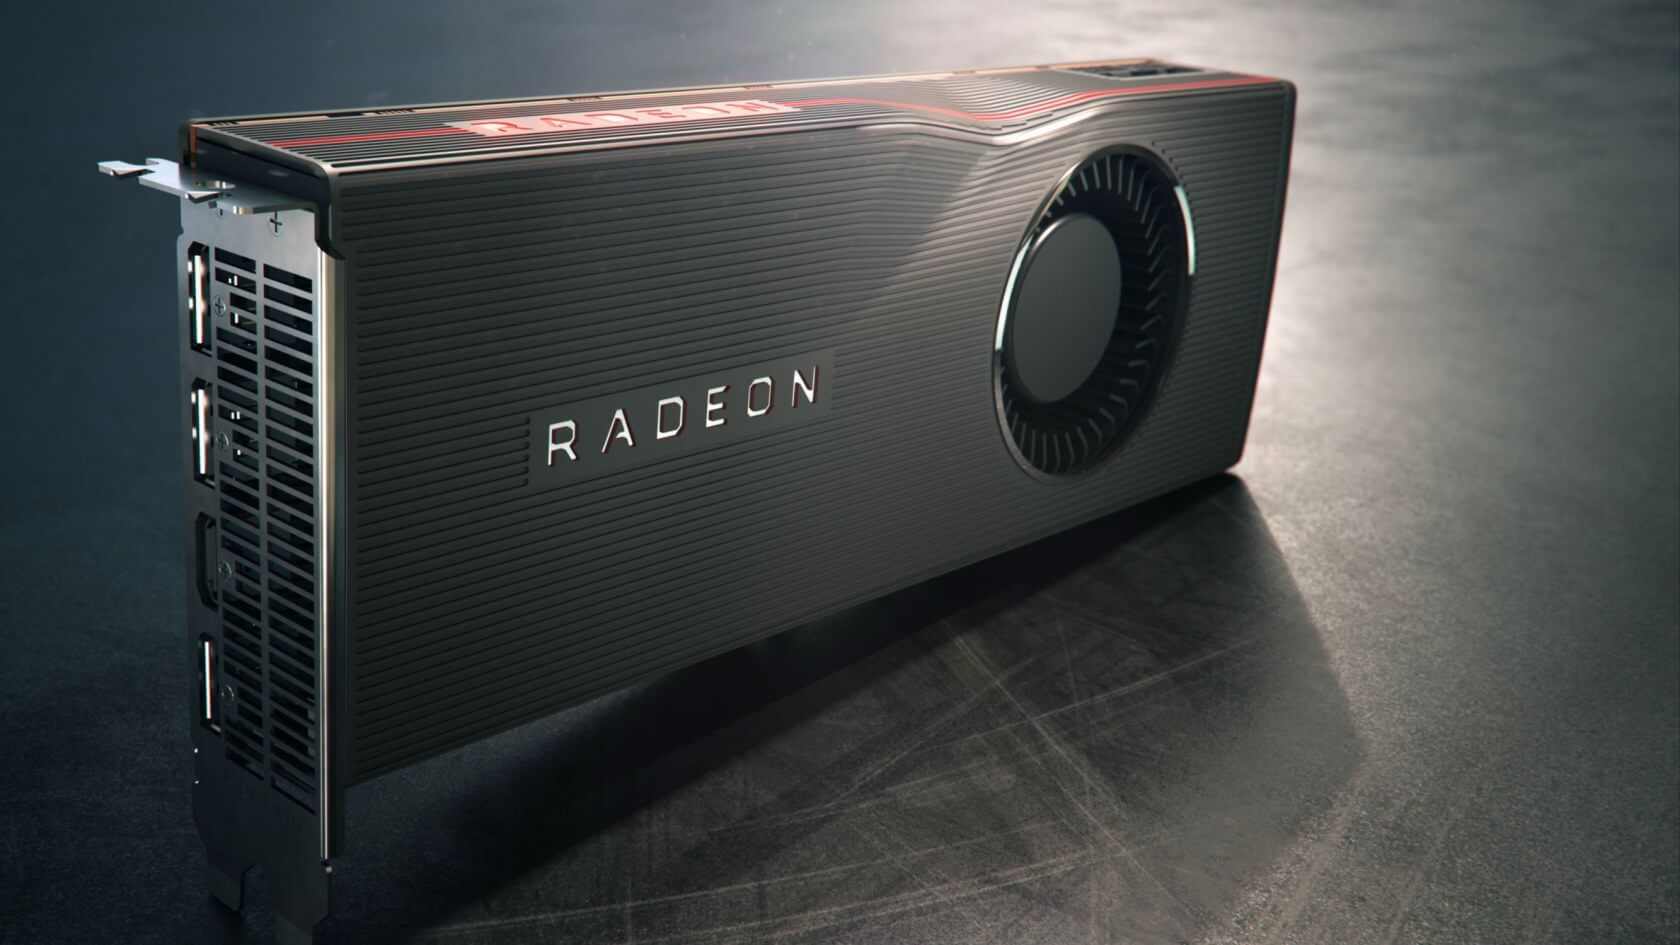 AMD updates its 'Raise the Game' bundle with new freebies for Radeon customers